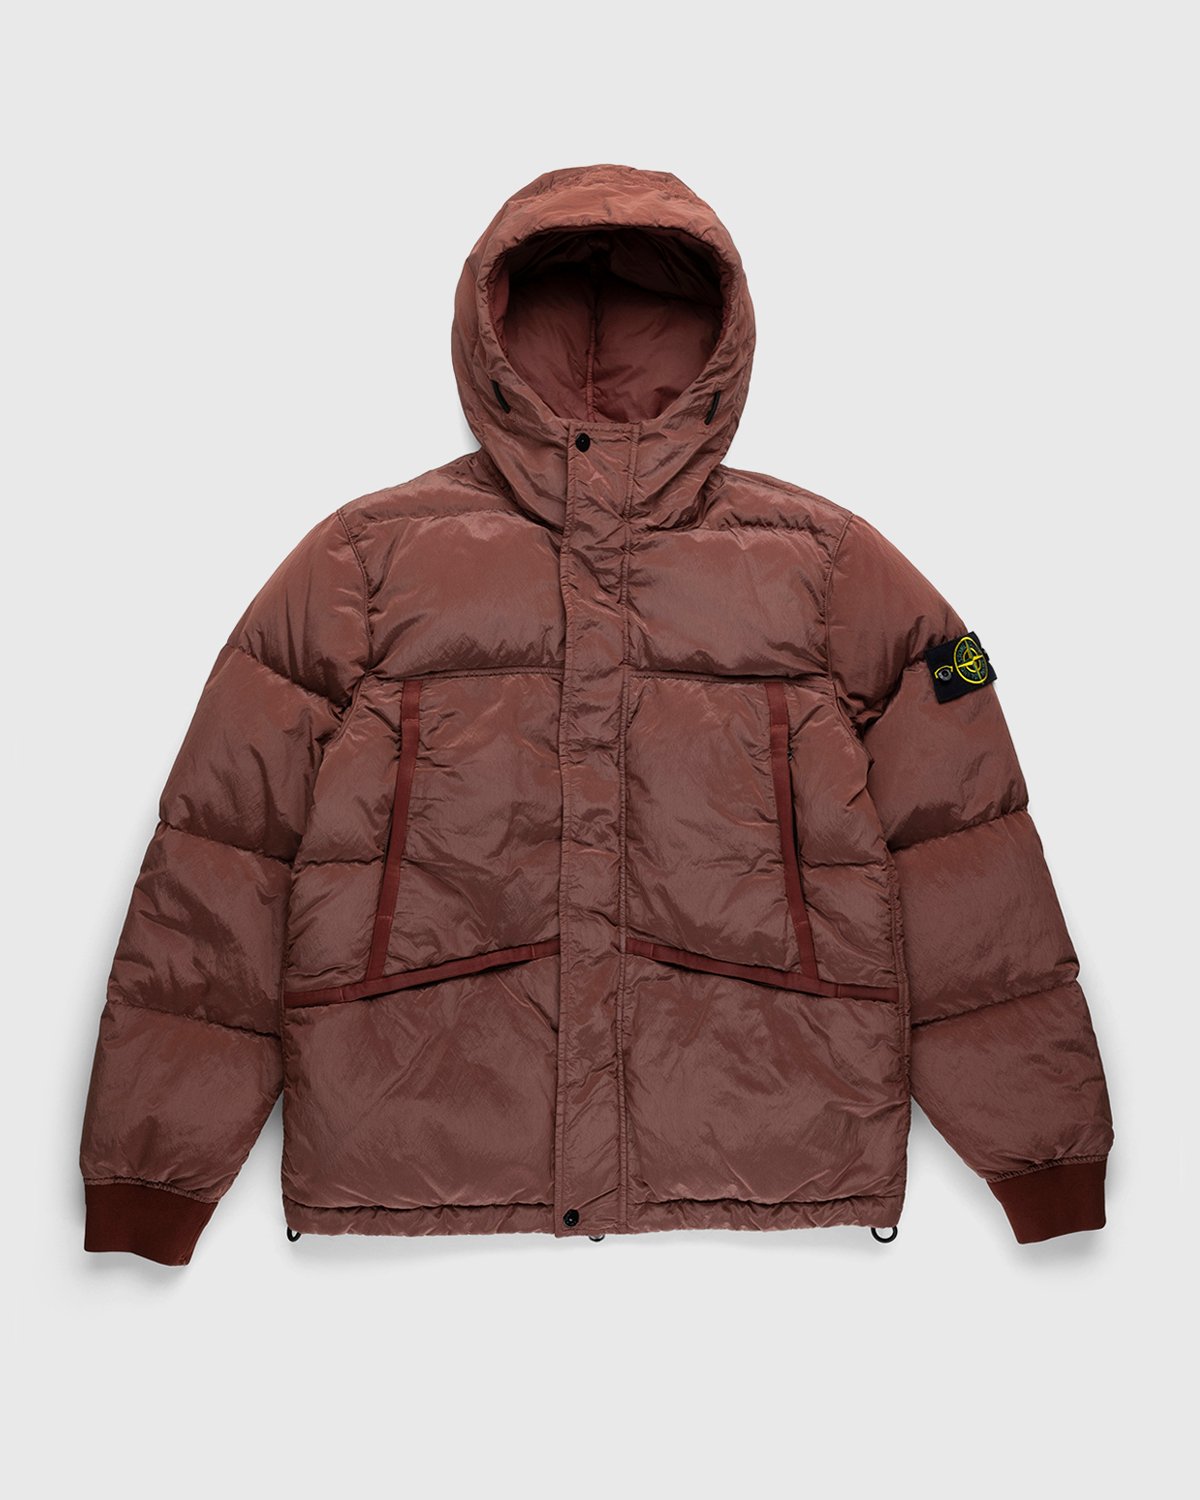 Stone Island - Real Down Jacket Brick Red - Clothing - Red - Image 1